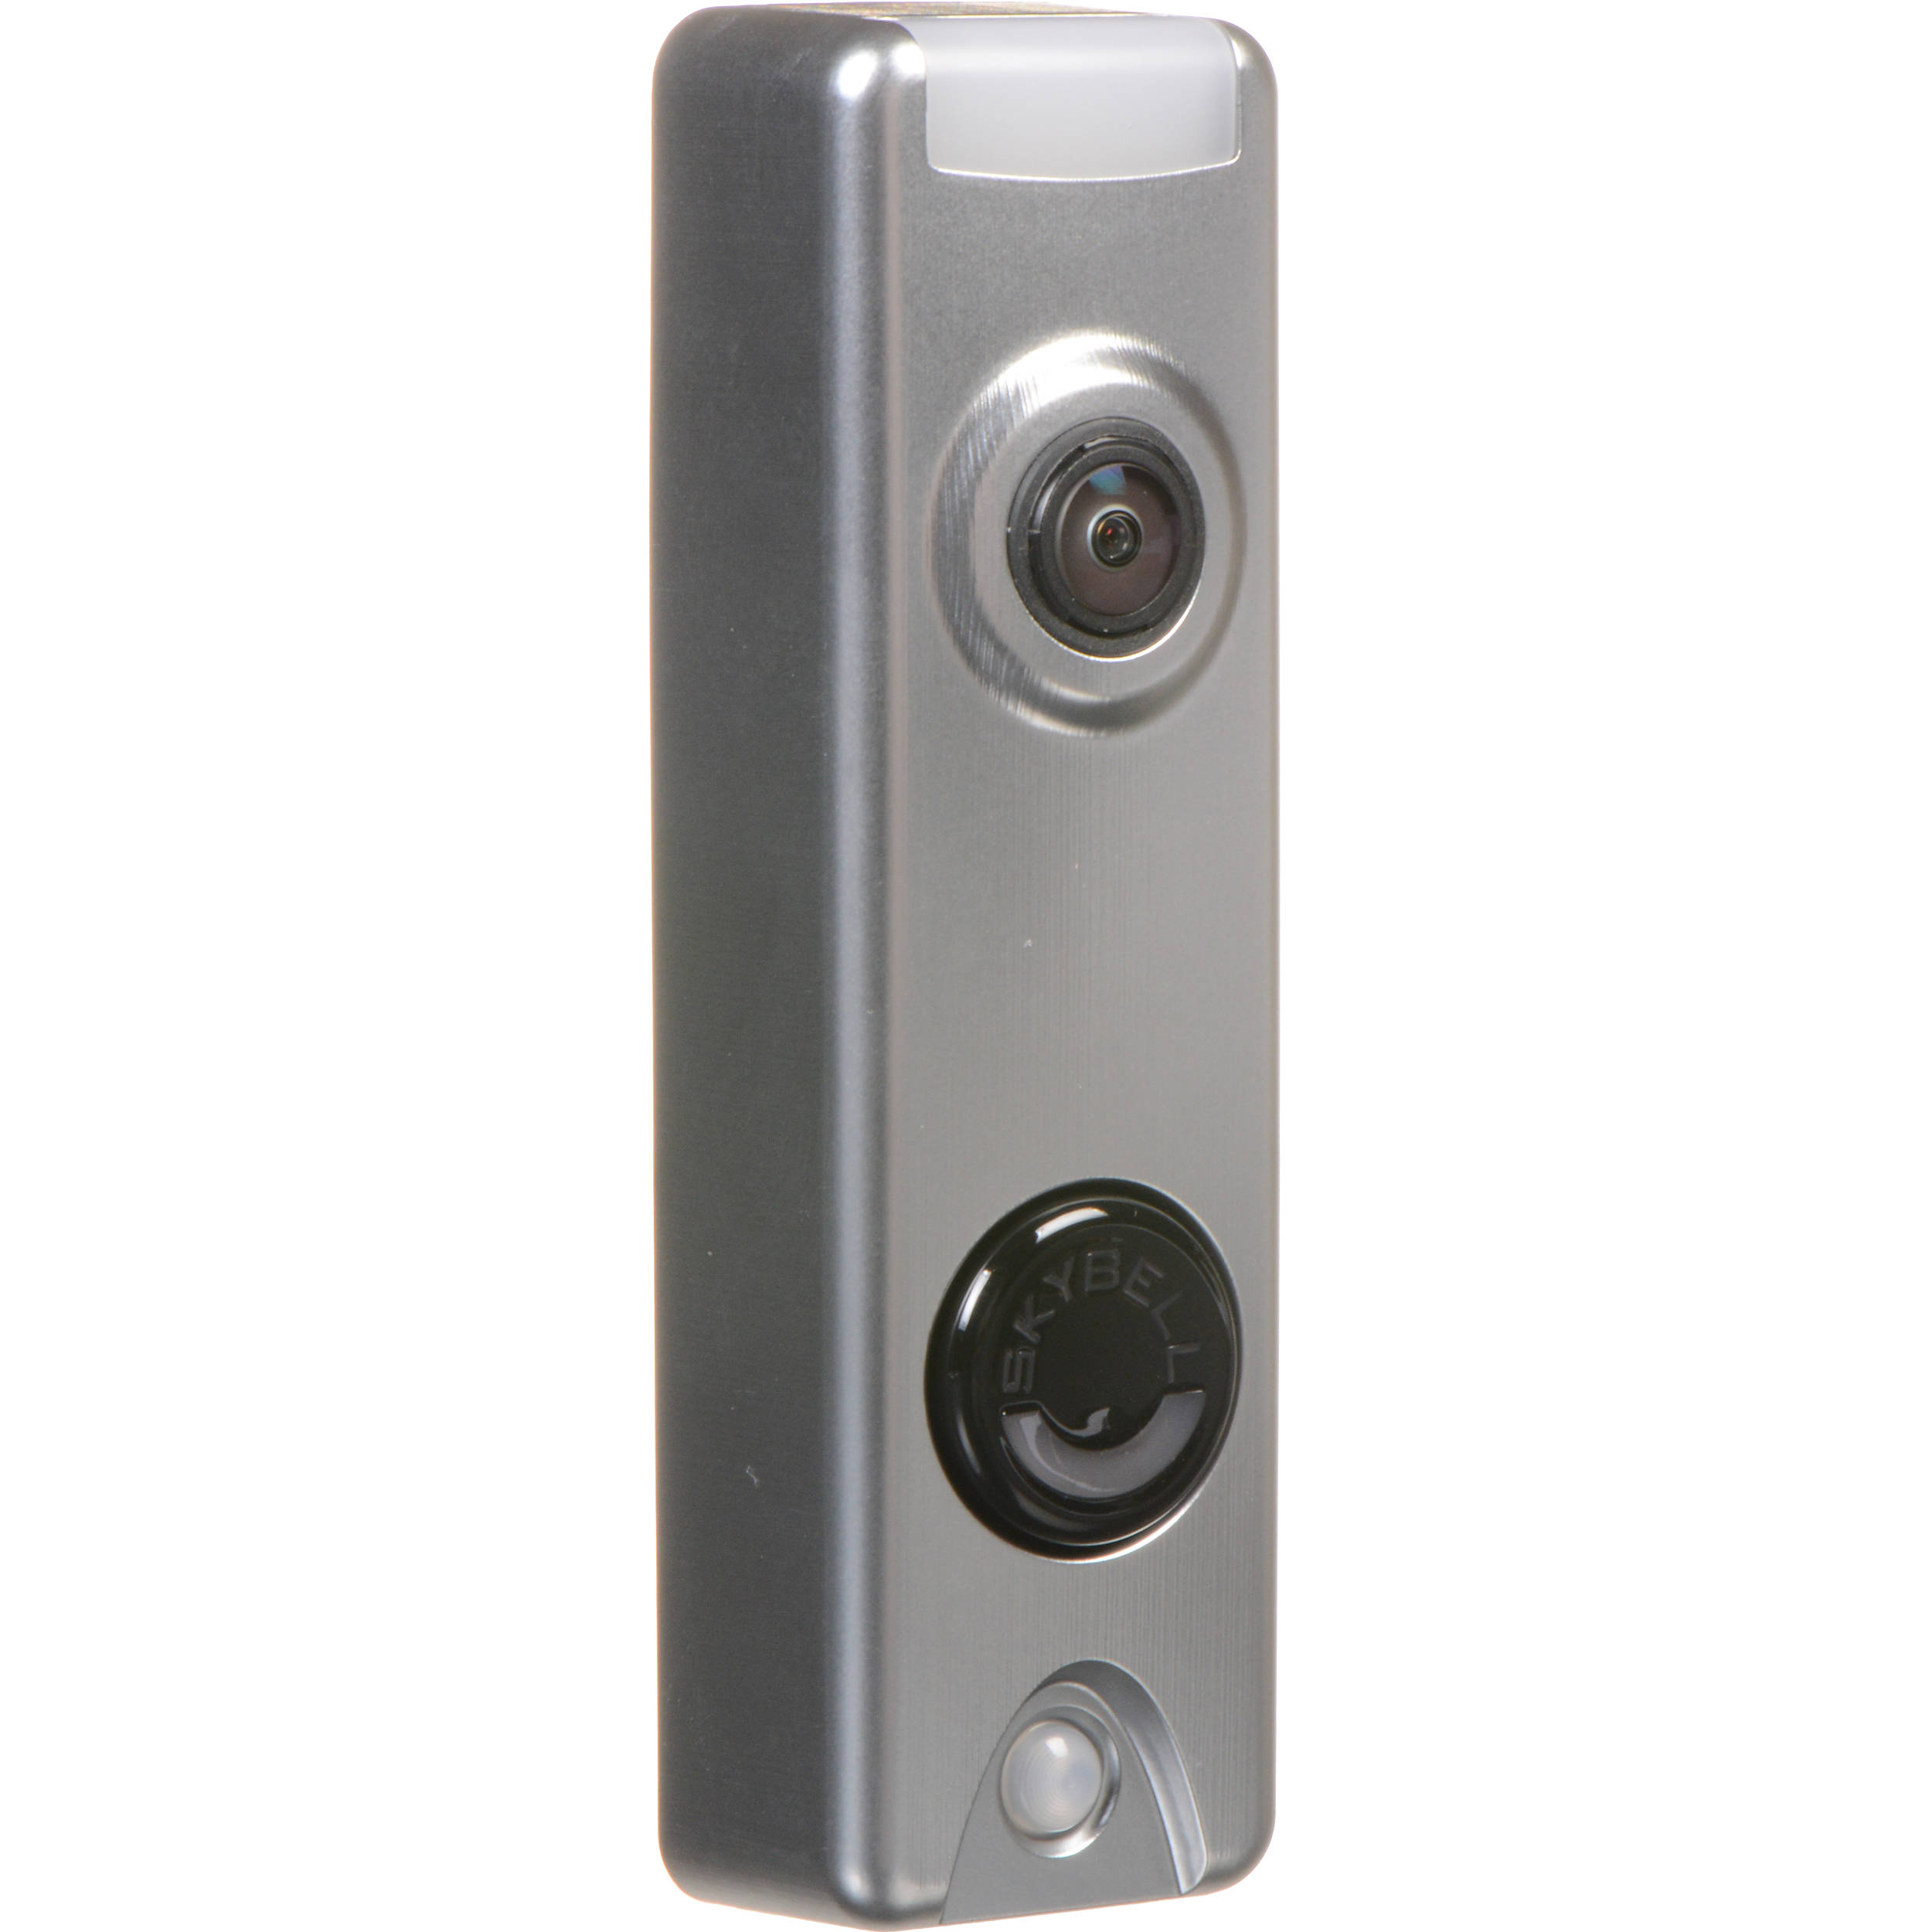 skybell security camera